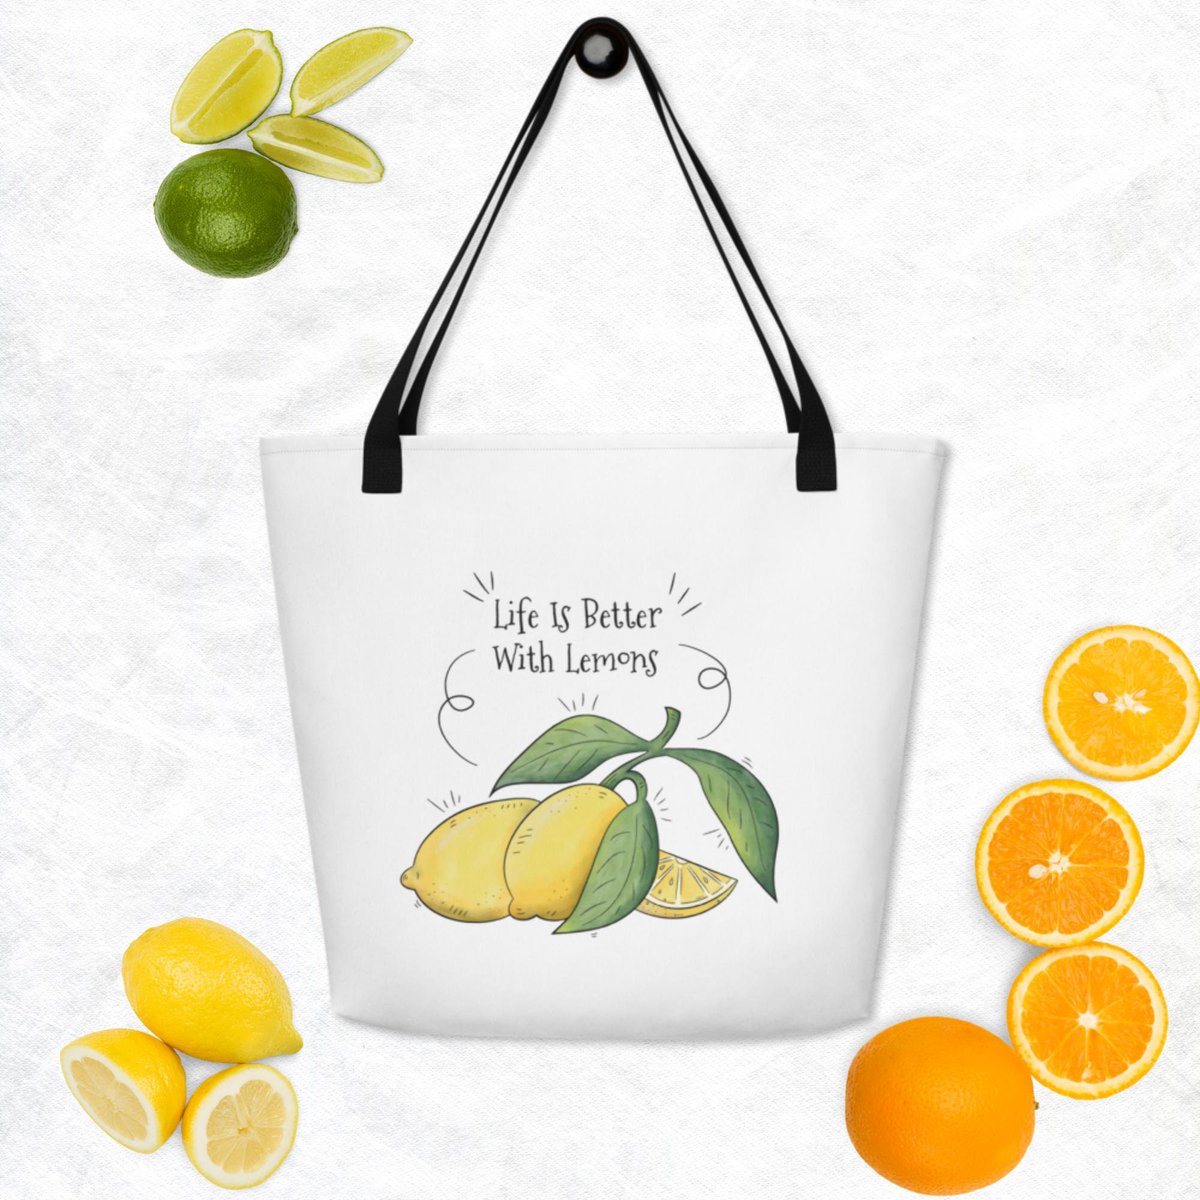 Come check out the the latest addition to The Werks Depot: Better with Lemons Large Tote Bag etsy.me/3GsVYu8 #etsy #largetote #largecanvastote #largetotebagboho #largetotebag #totebagpocket #canvastotebag #lemontotebag #totebag #totebagcanvas